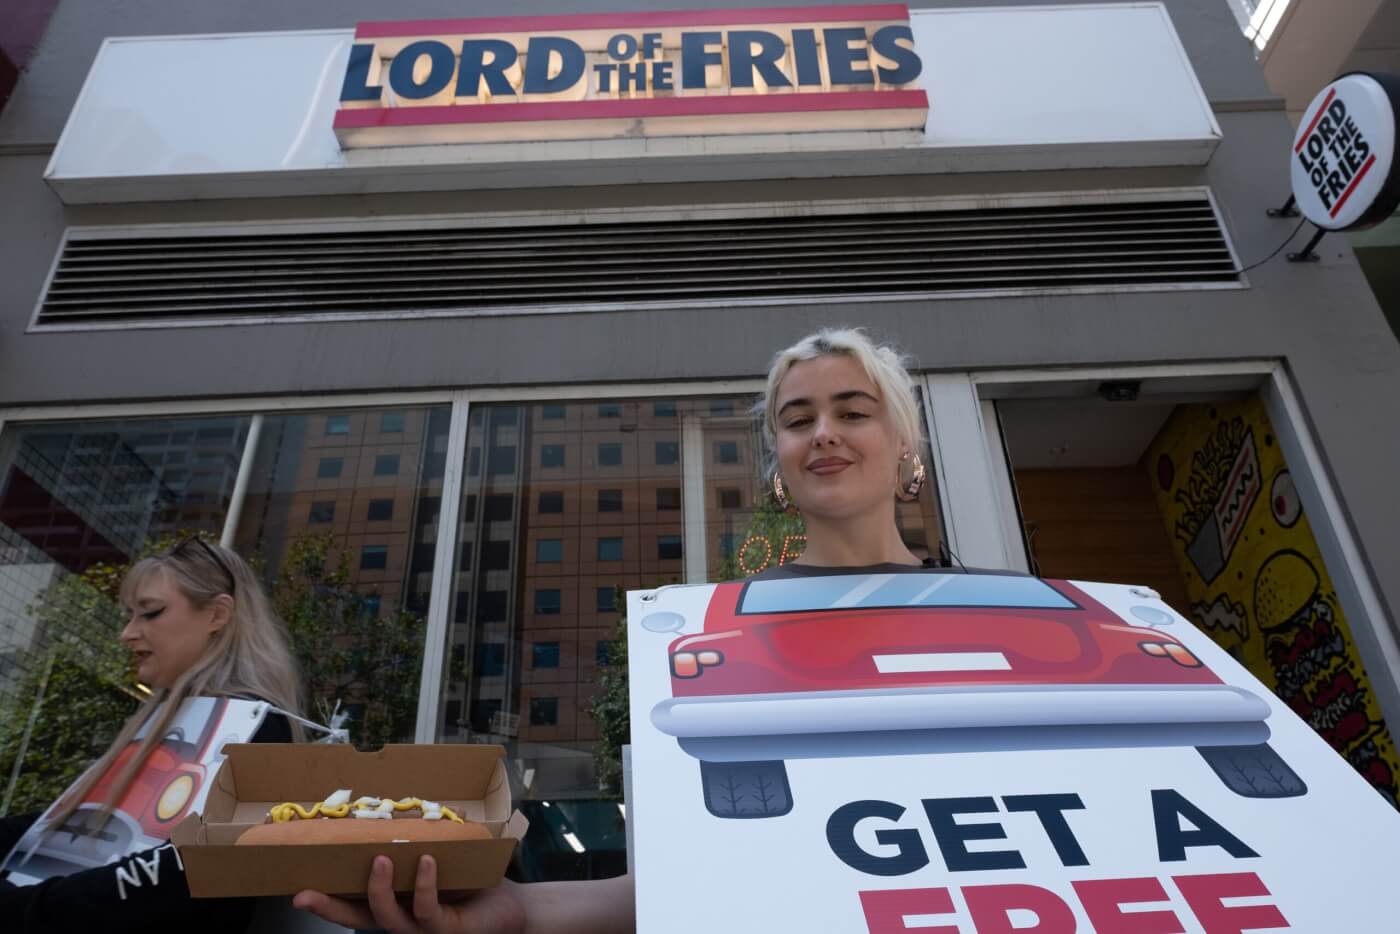 PETA activists wearing sandwich boards hand out hot dog to person on the street with "Lord of the Fries" sign in background